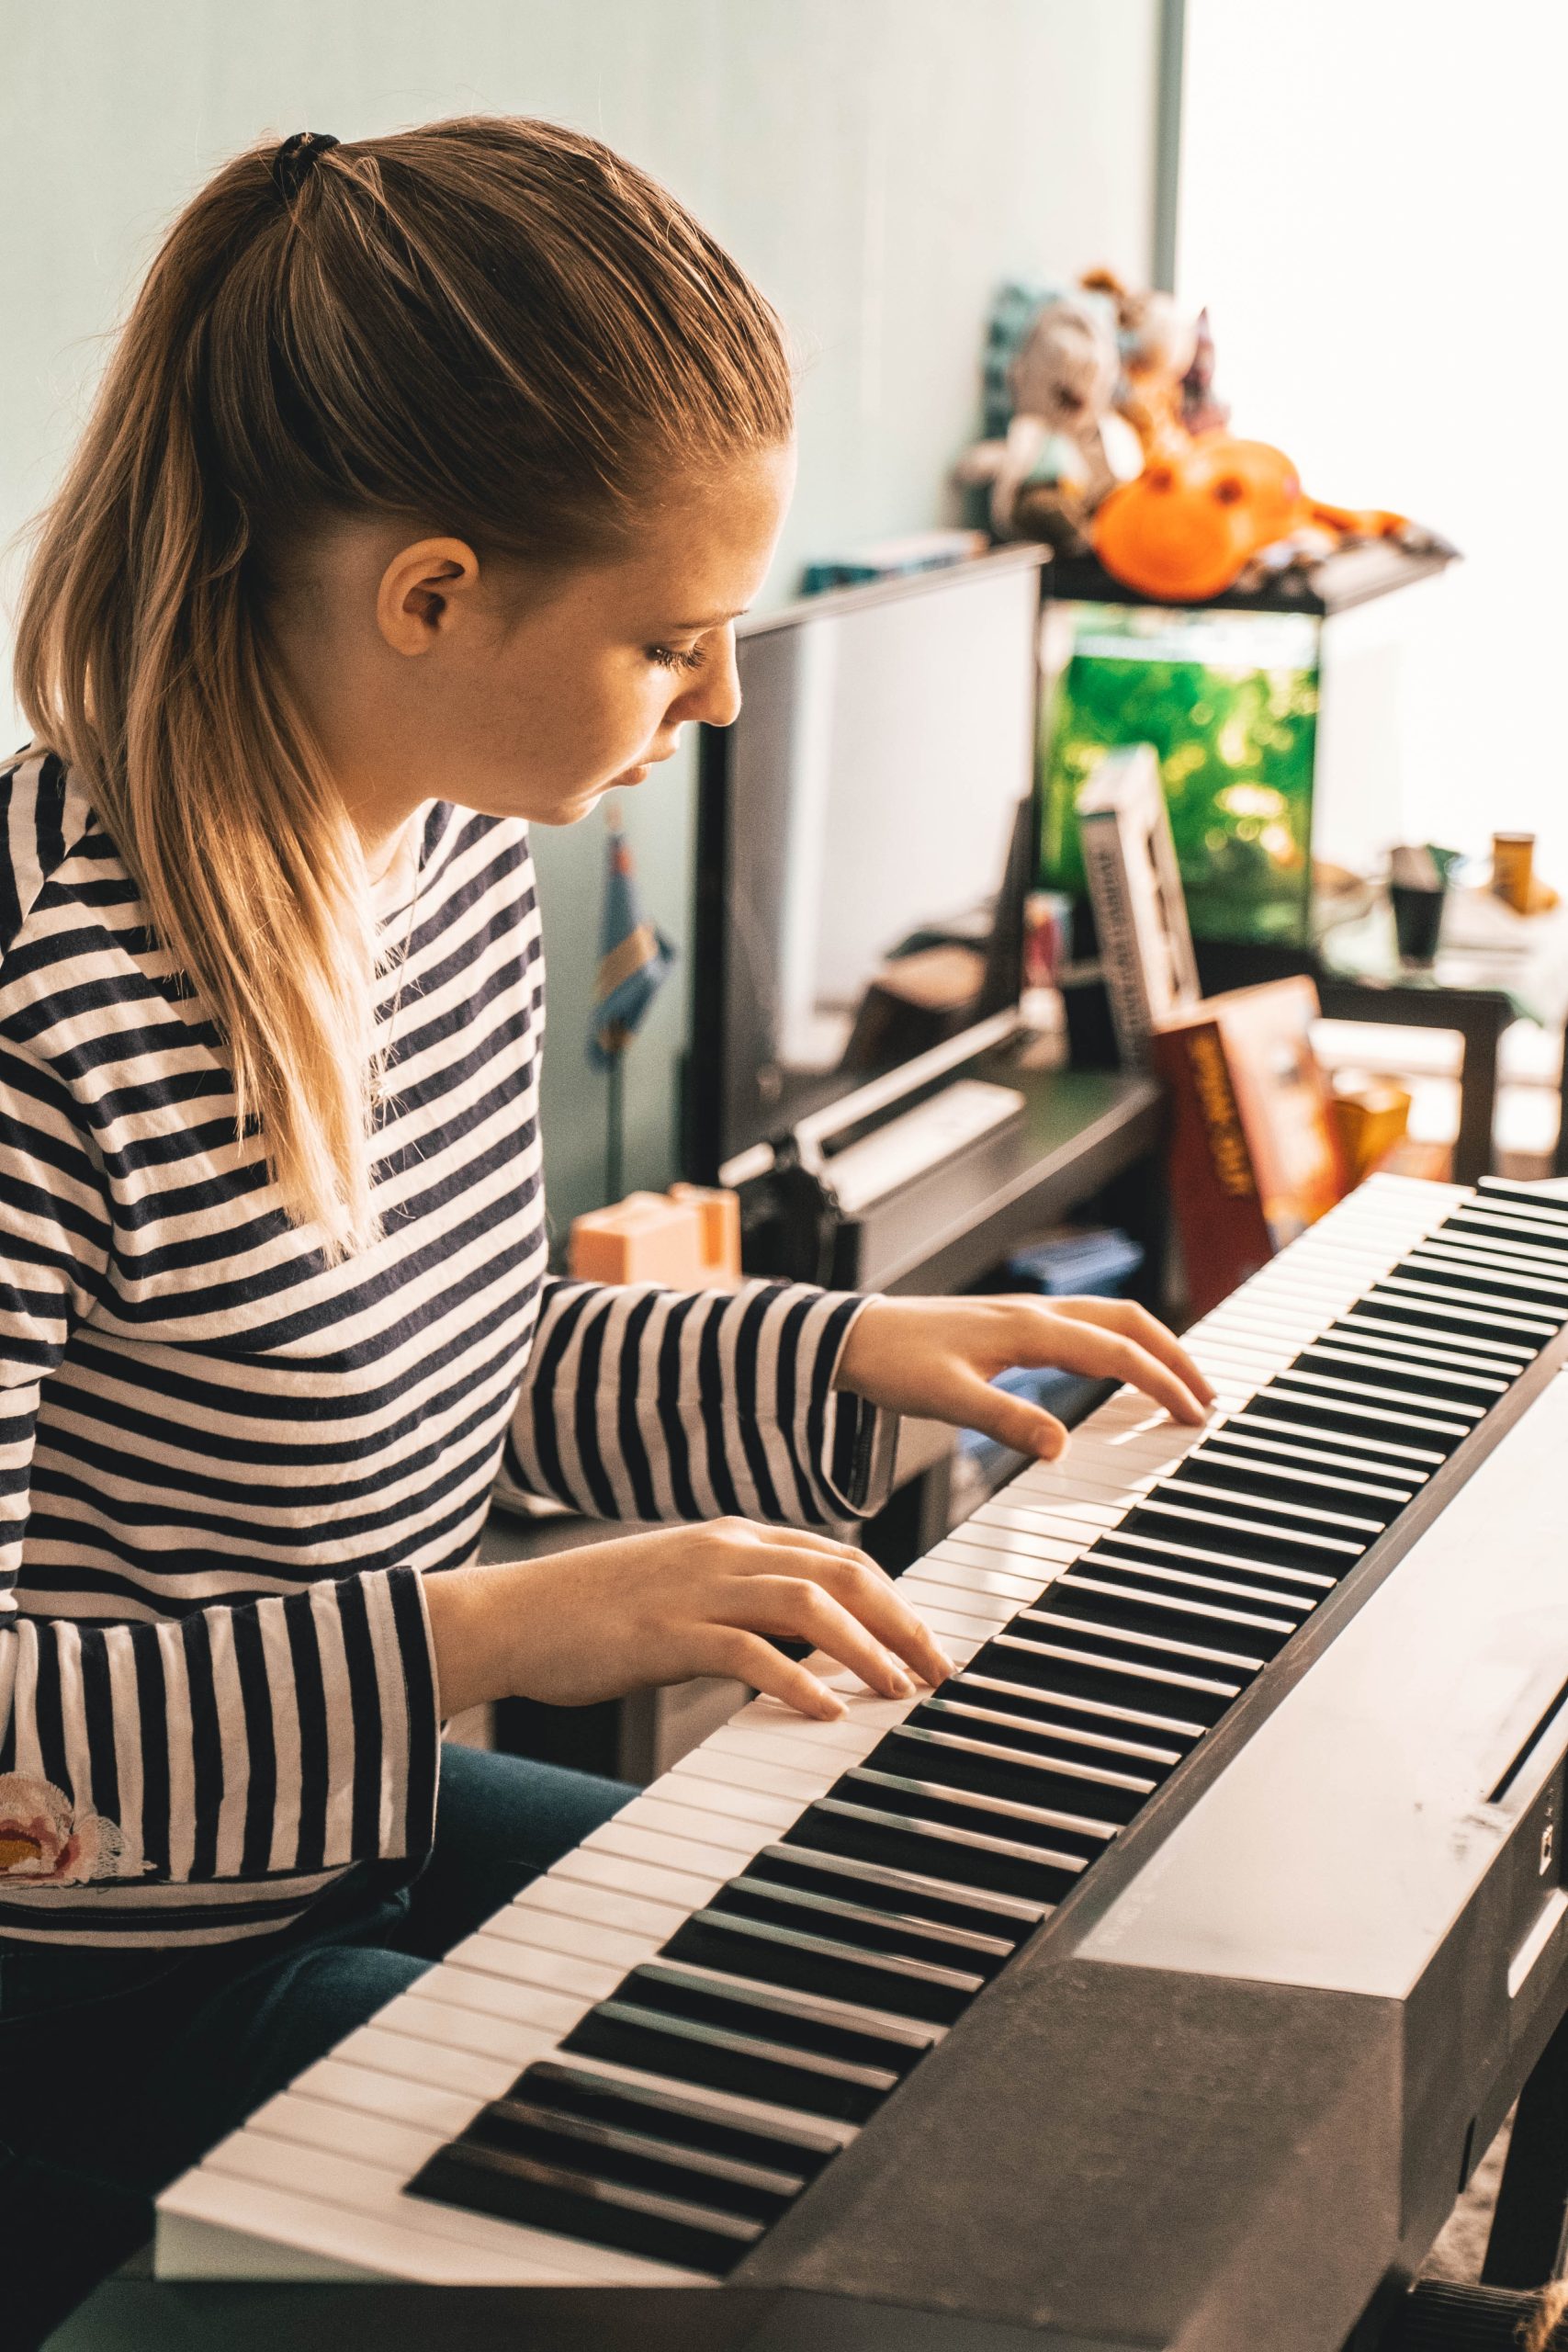 Digital Piano vs Acoustic Piano: Which One Is Right for You?